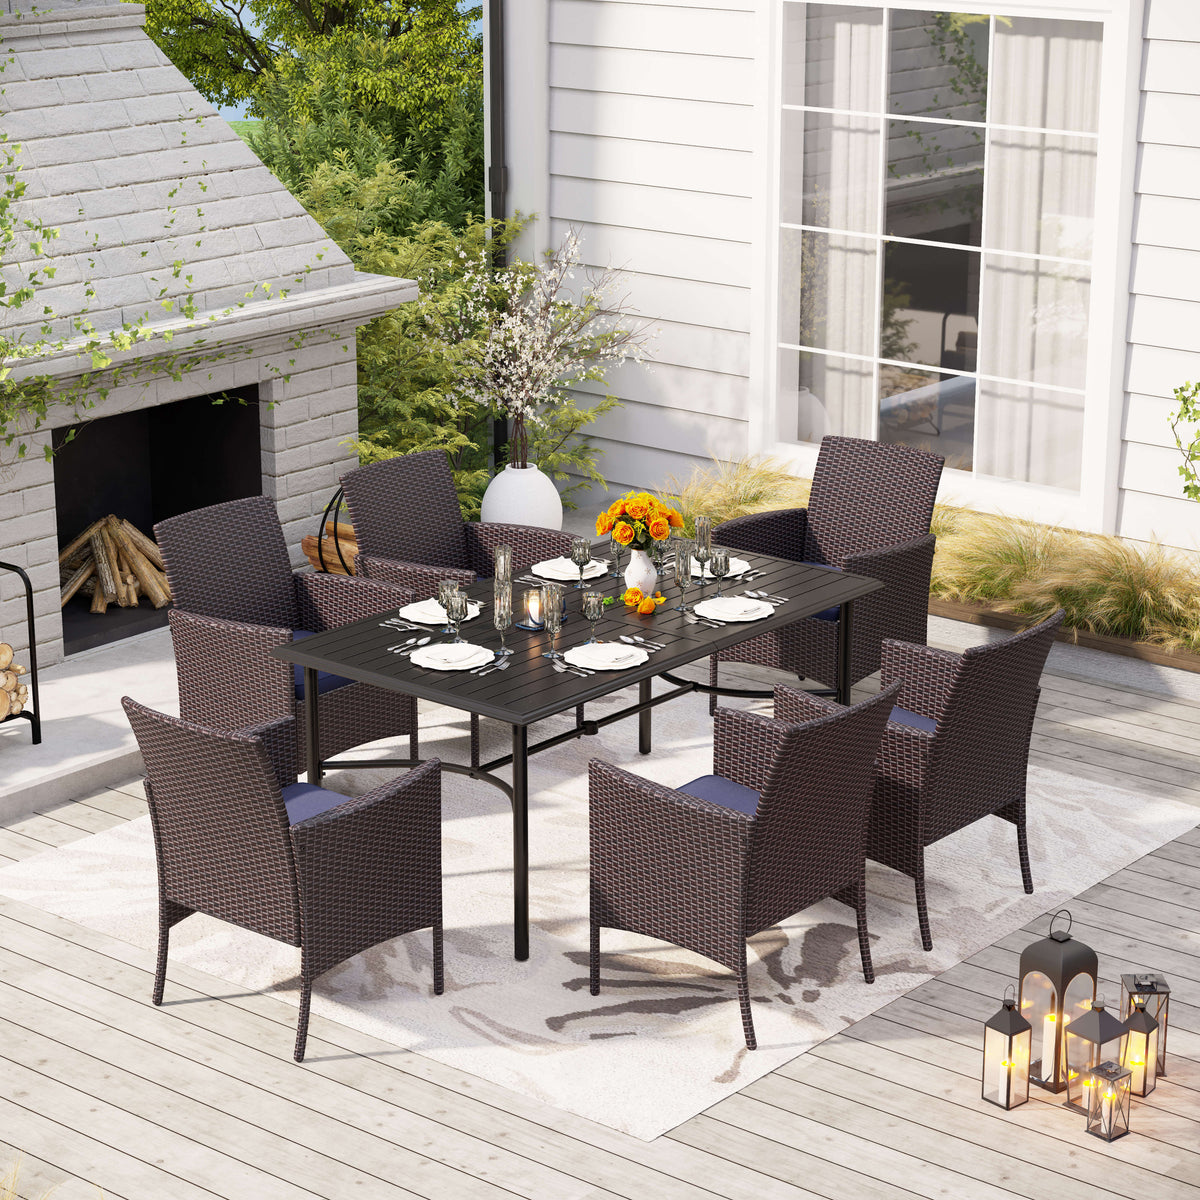 MFSTUDIO 7-Piece Patio Dining Set Bowed-bar Table & Cushioned Rattan Fixed Chairs